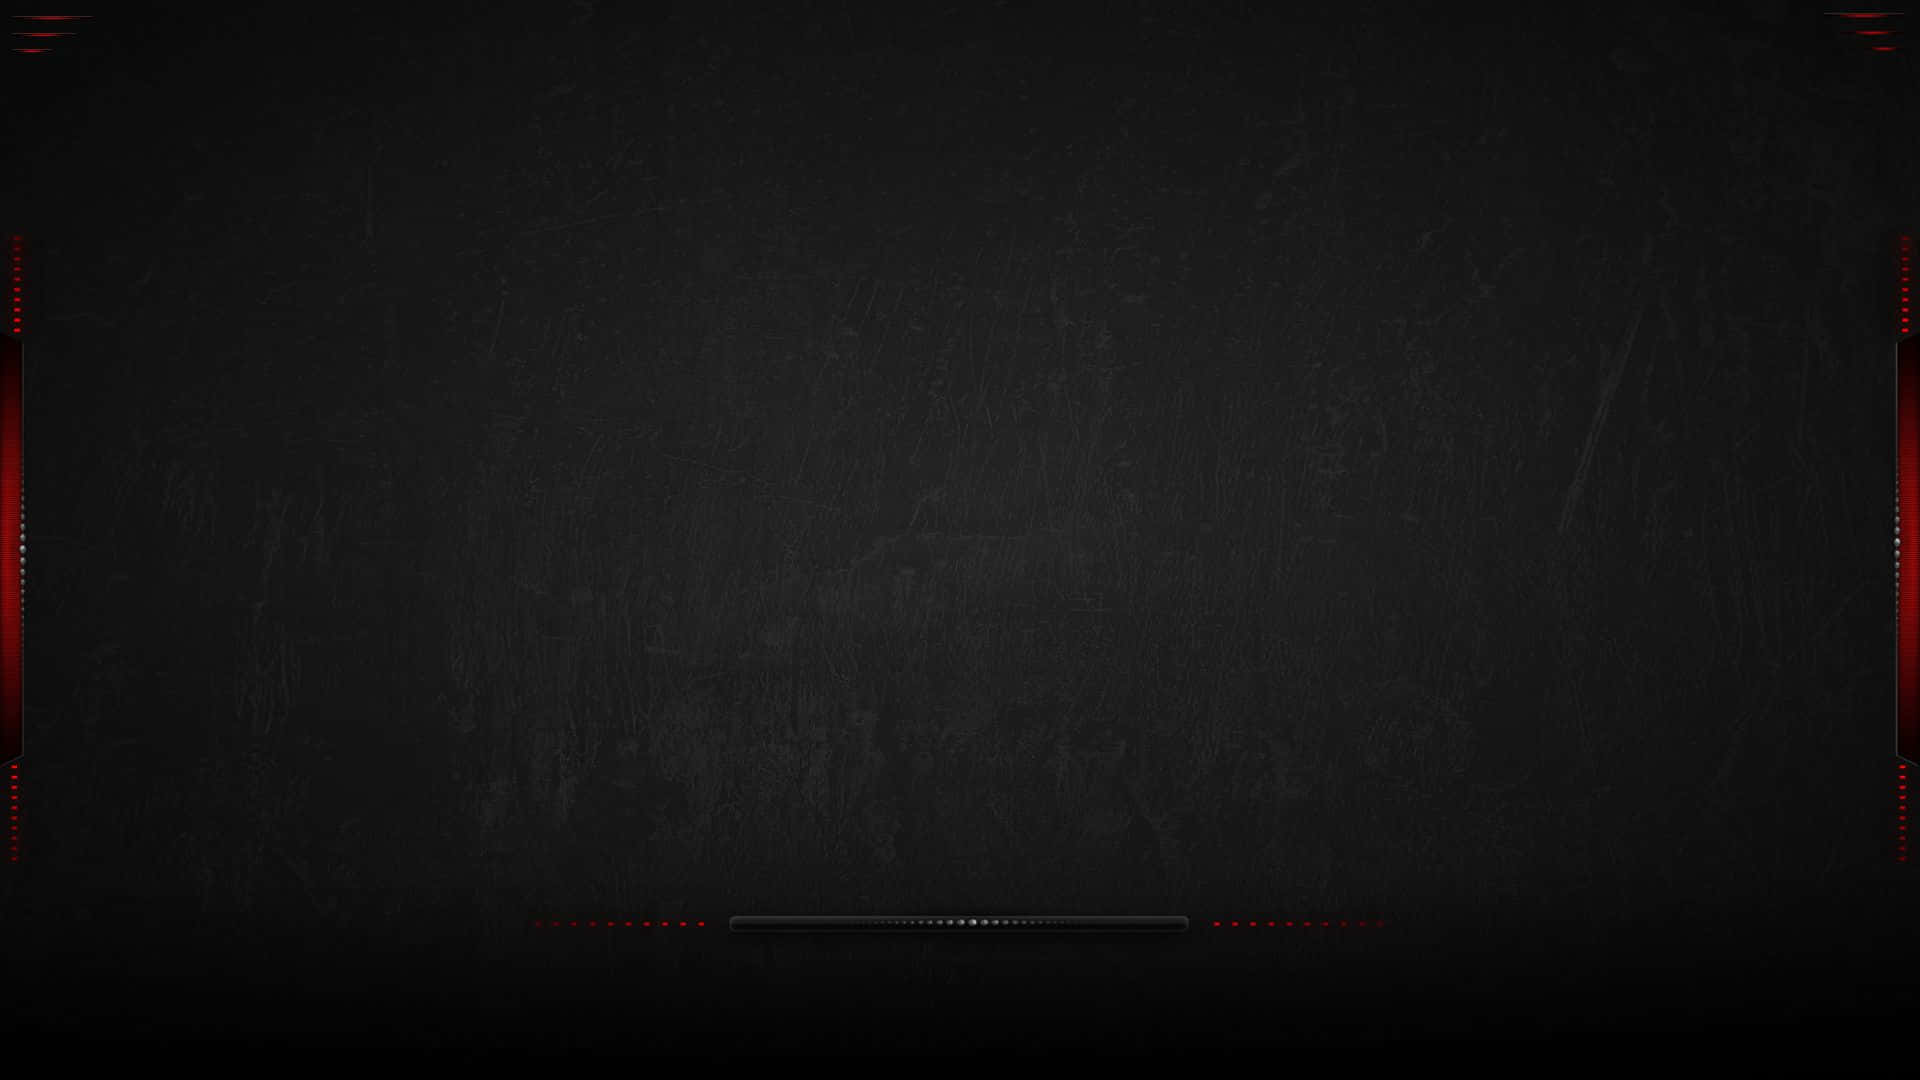 A Black Background With Red Lines On It